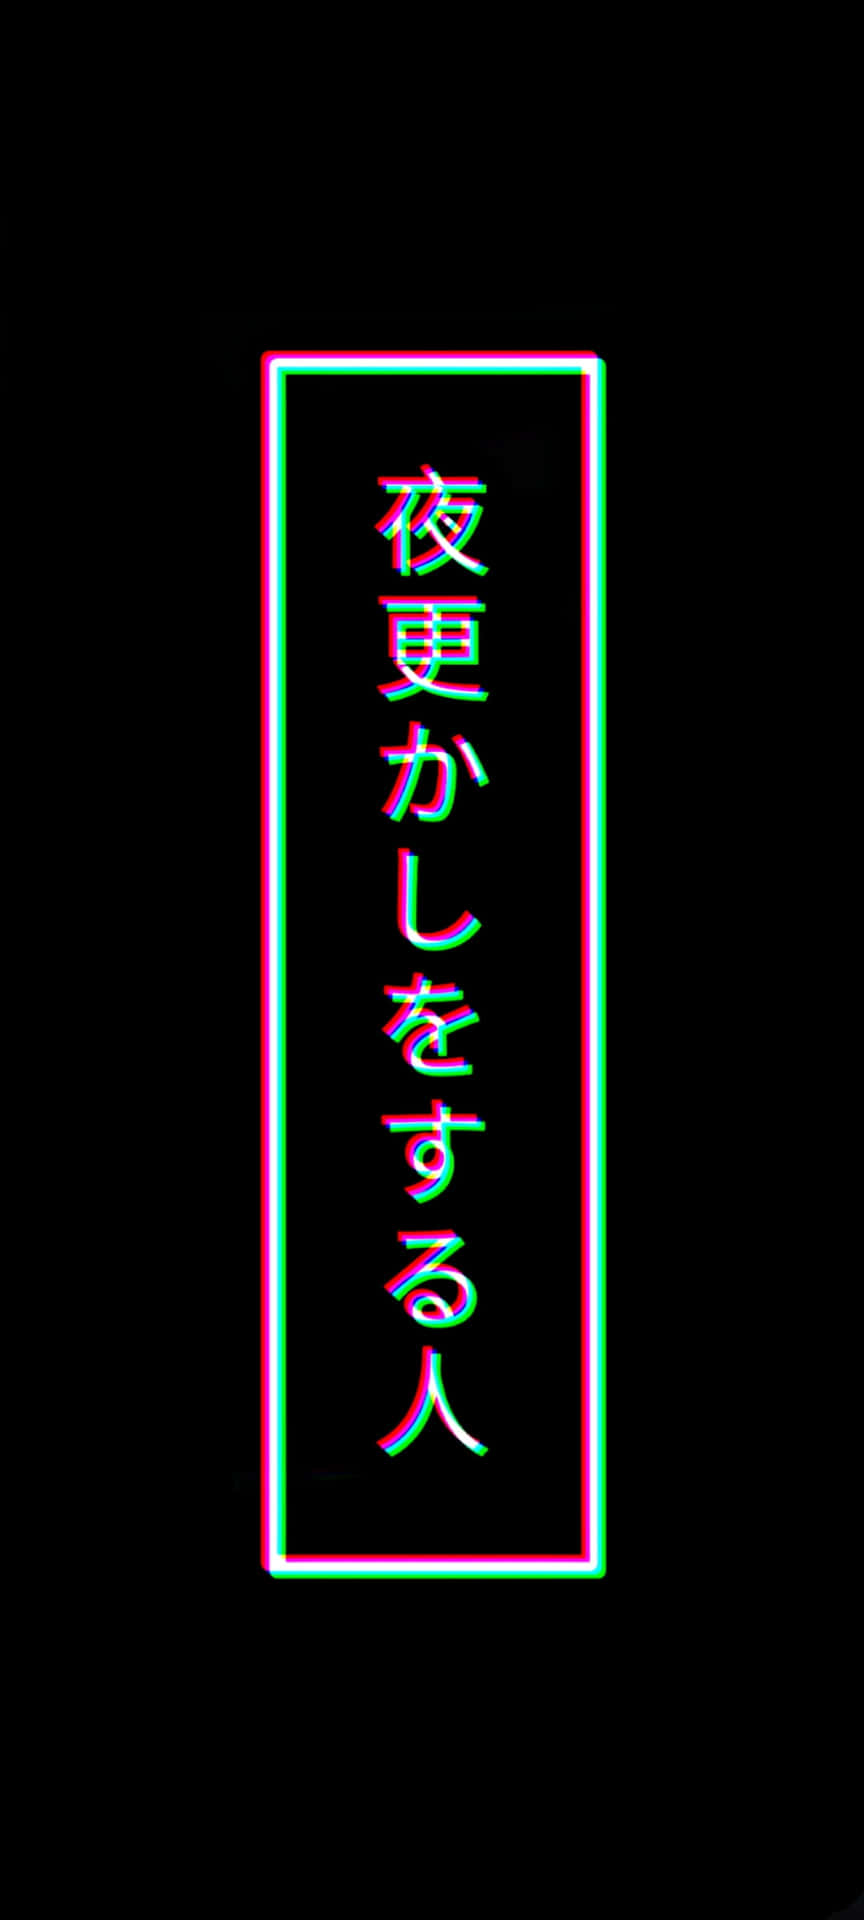 Neon Glitch Japanese Text Aesthetic Wallpaper